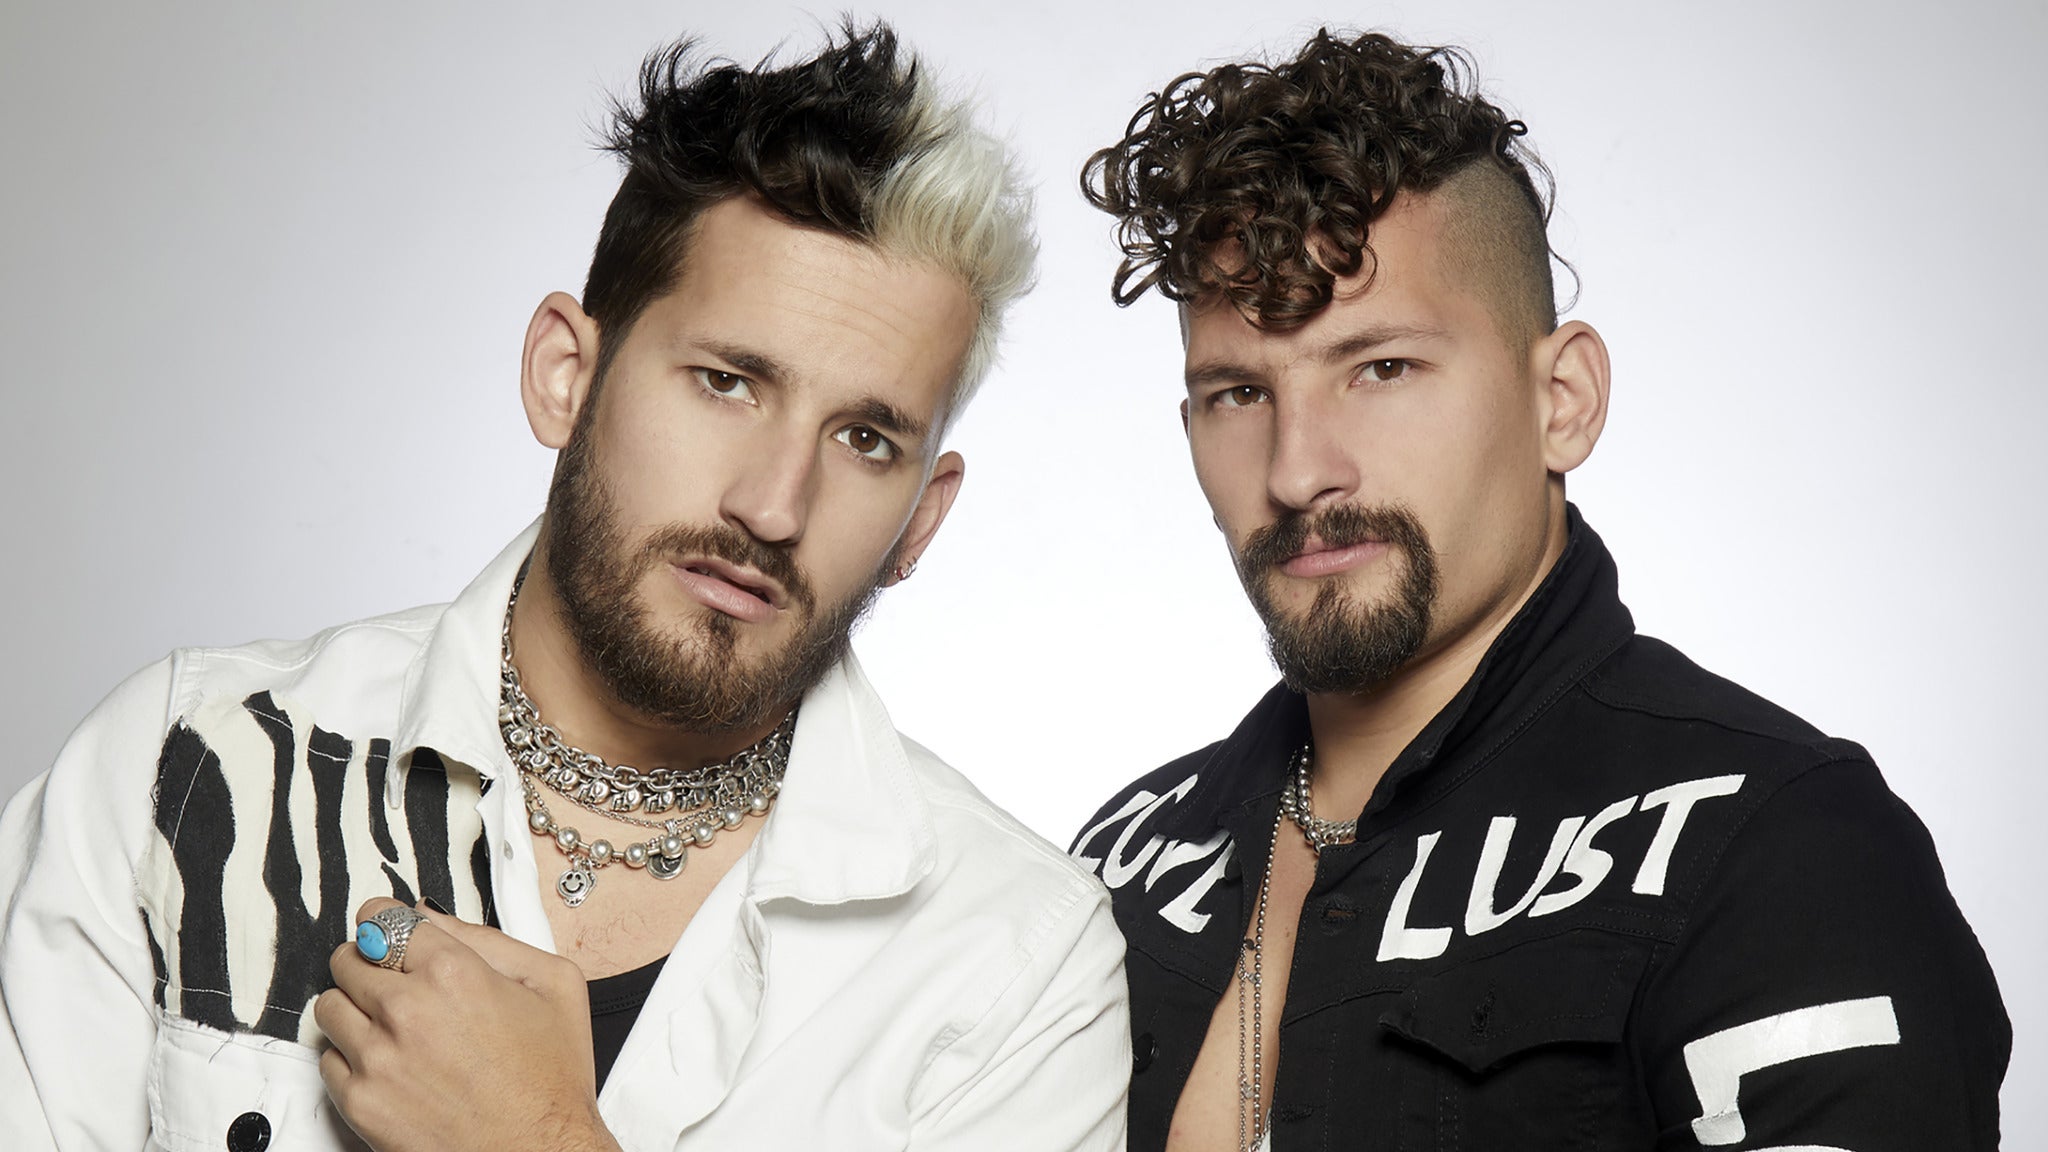 Mau y Ricky + Piso 21 - Panas & Parceros in Houston promo photo for Live Nation presale offer code